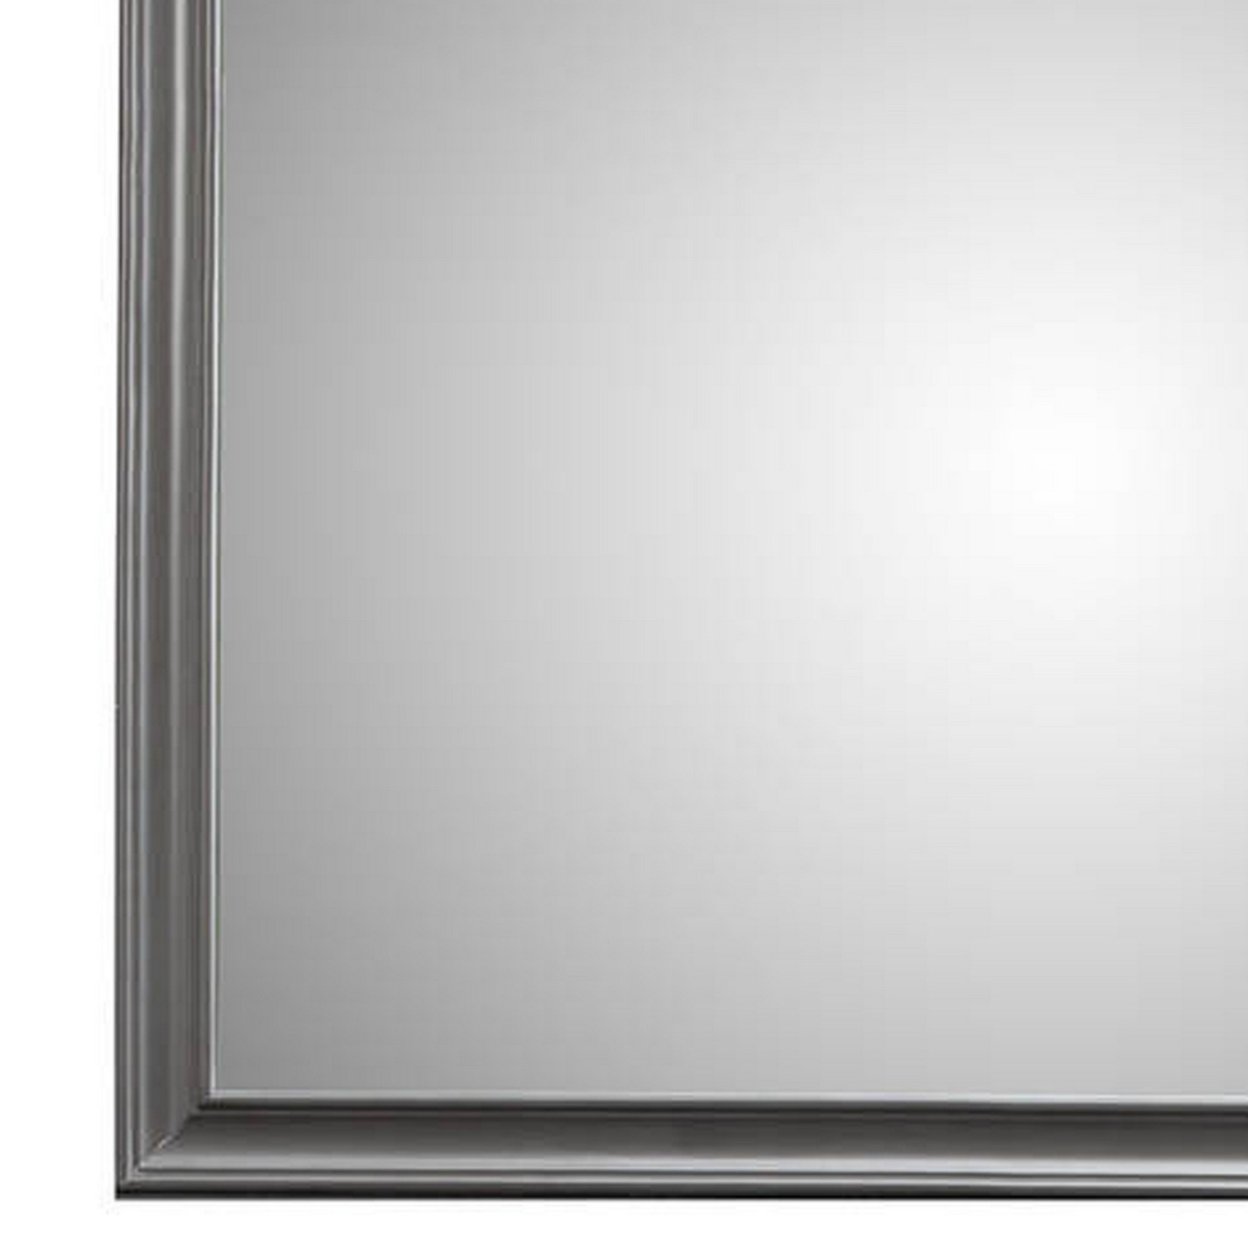 Transitional Style Rectangular Molded Mirror With Wooden Frame, Gray- Saltoro Sherpi